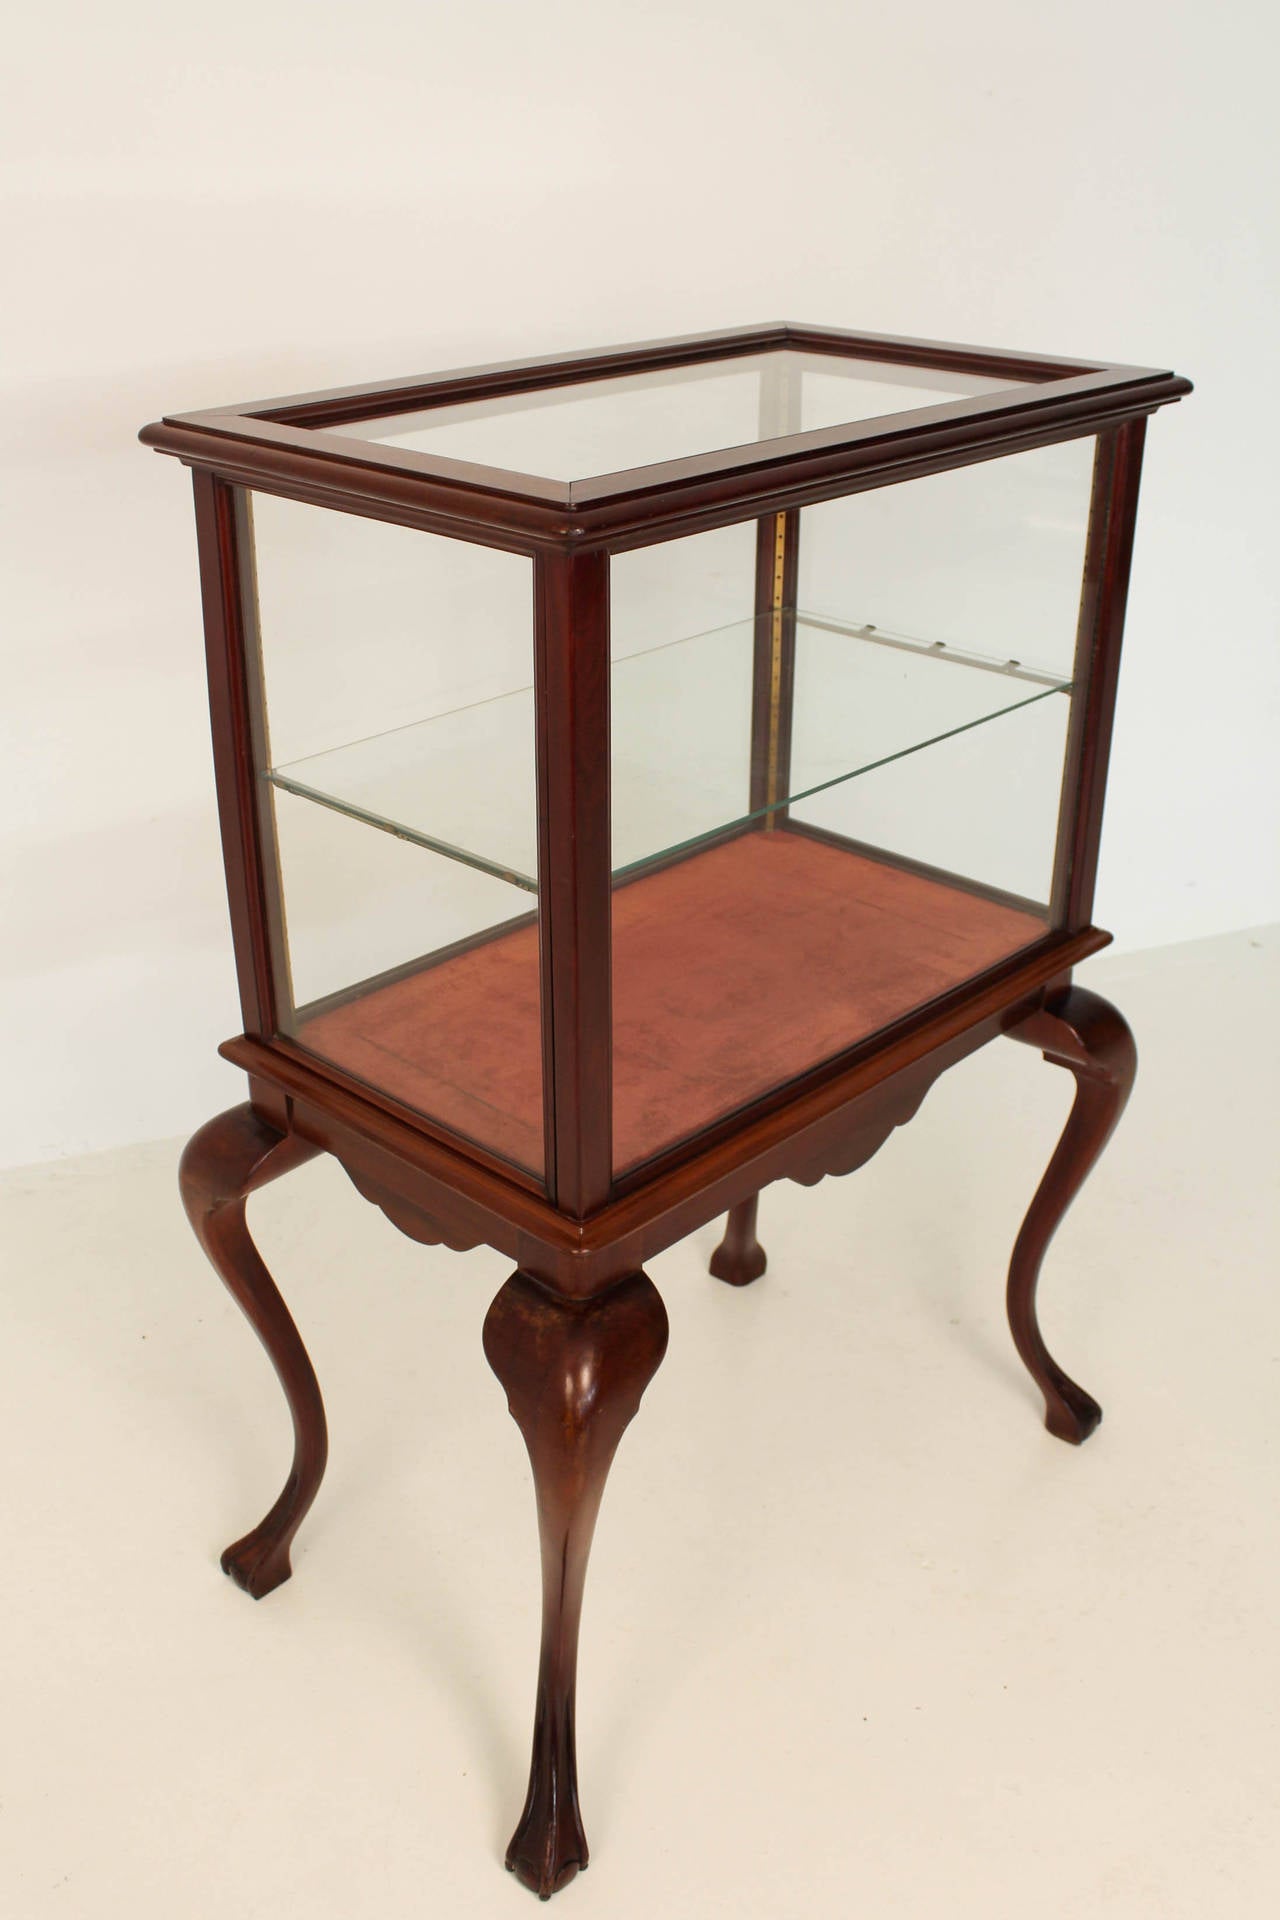 Fine mahogany Georgian style display cabinet on stand, circa 1900.
With two sliding doors on the left side and right side.
In good condition with a nice patina.